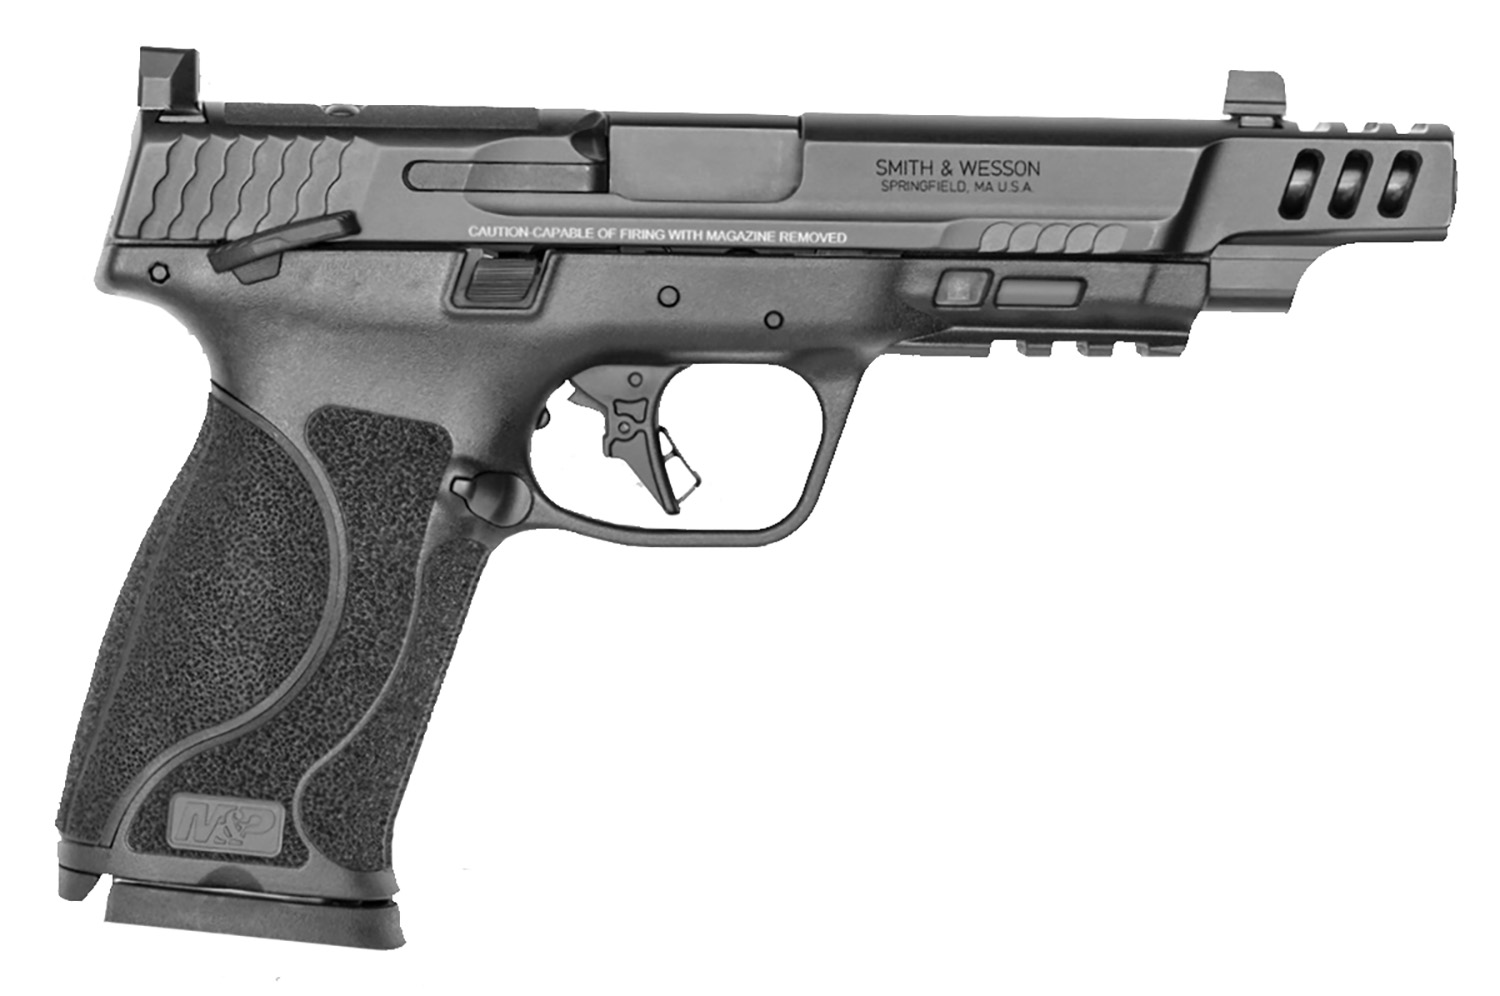 S&amp;W M&amp;P PC       13915 10M M2.0 OR THSFTY  5.6 15R